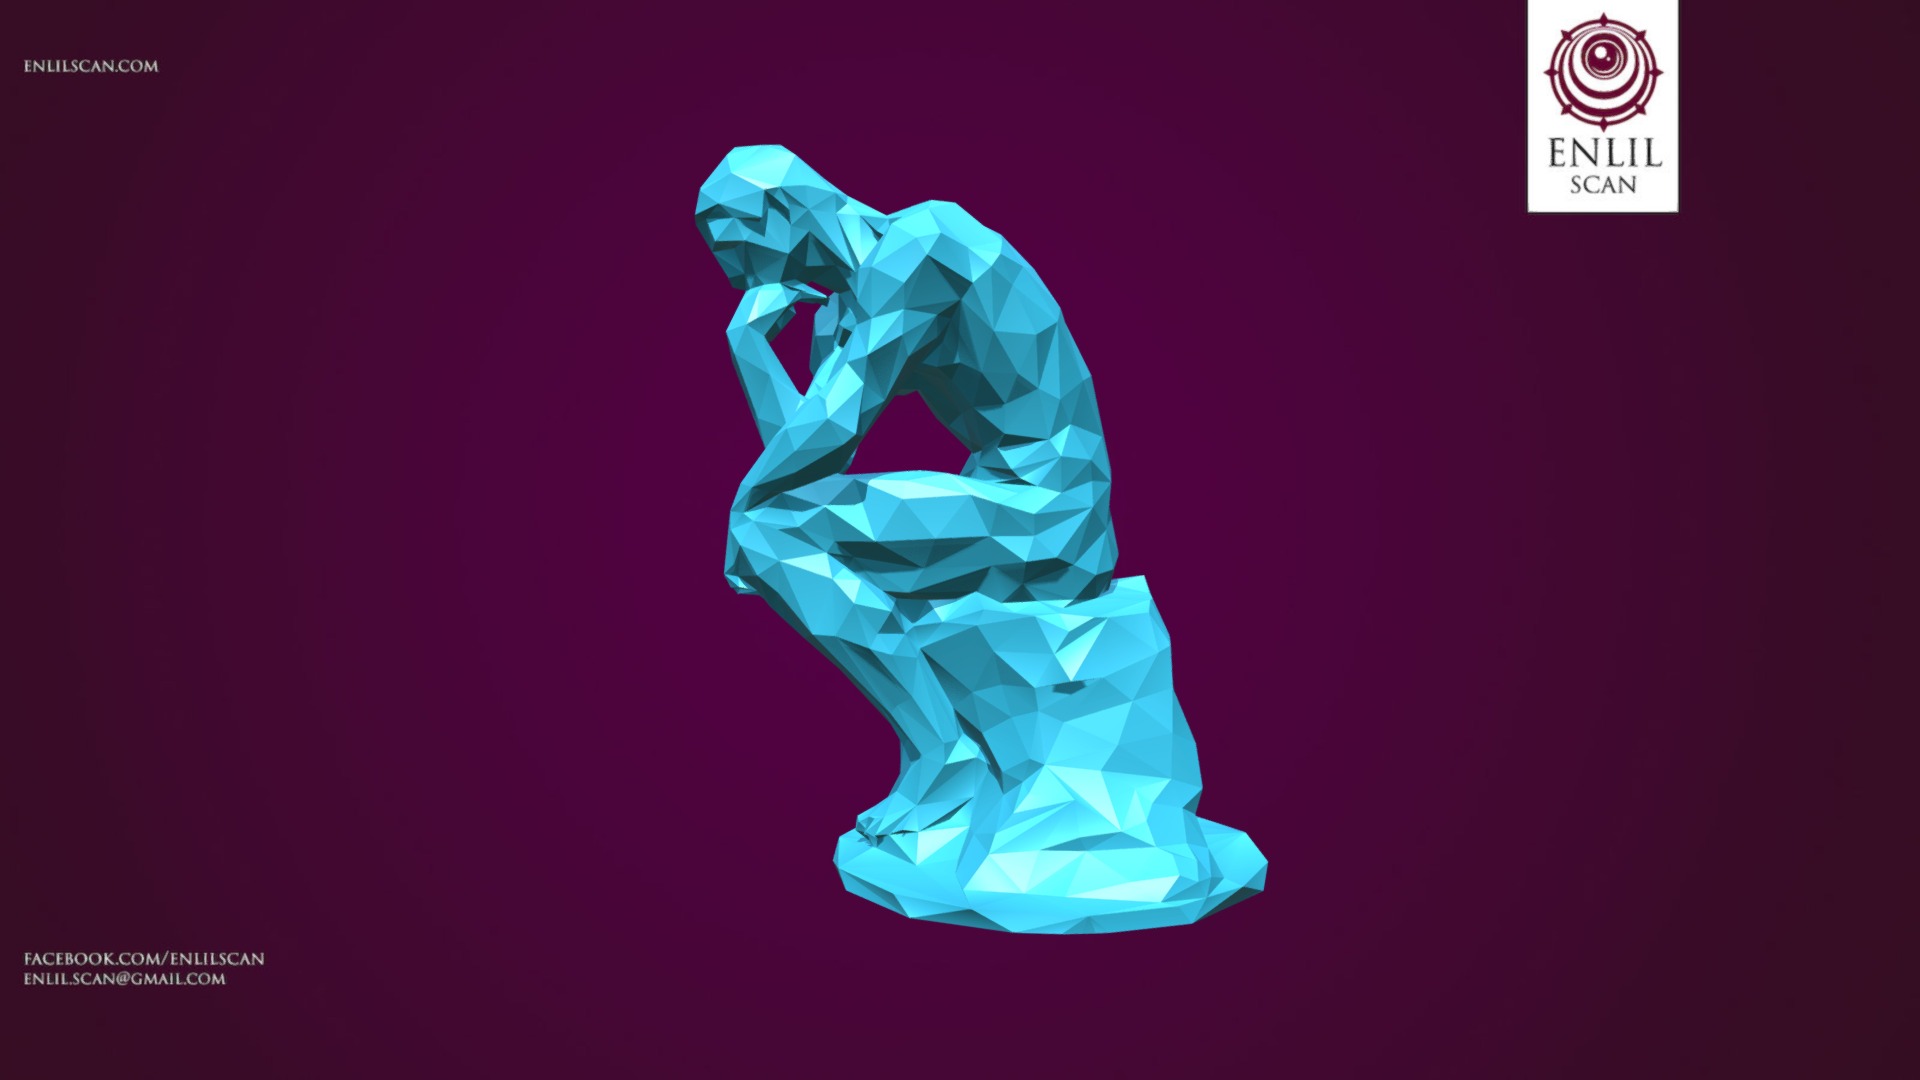 3D model Polygonal Thinker Statue – LowPoly - This is a 3D model of the Polygonal Thinker Statue - LowPoly. The 3D model is about a blue and green shoe.